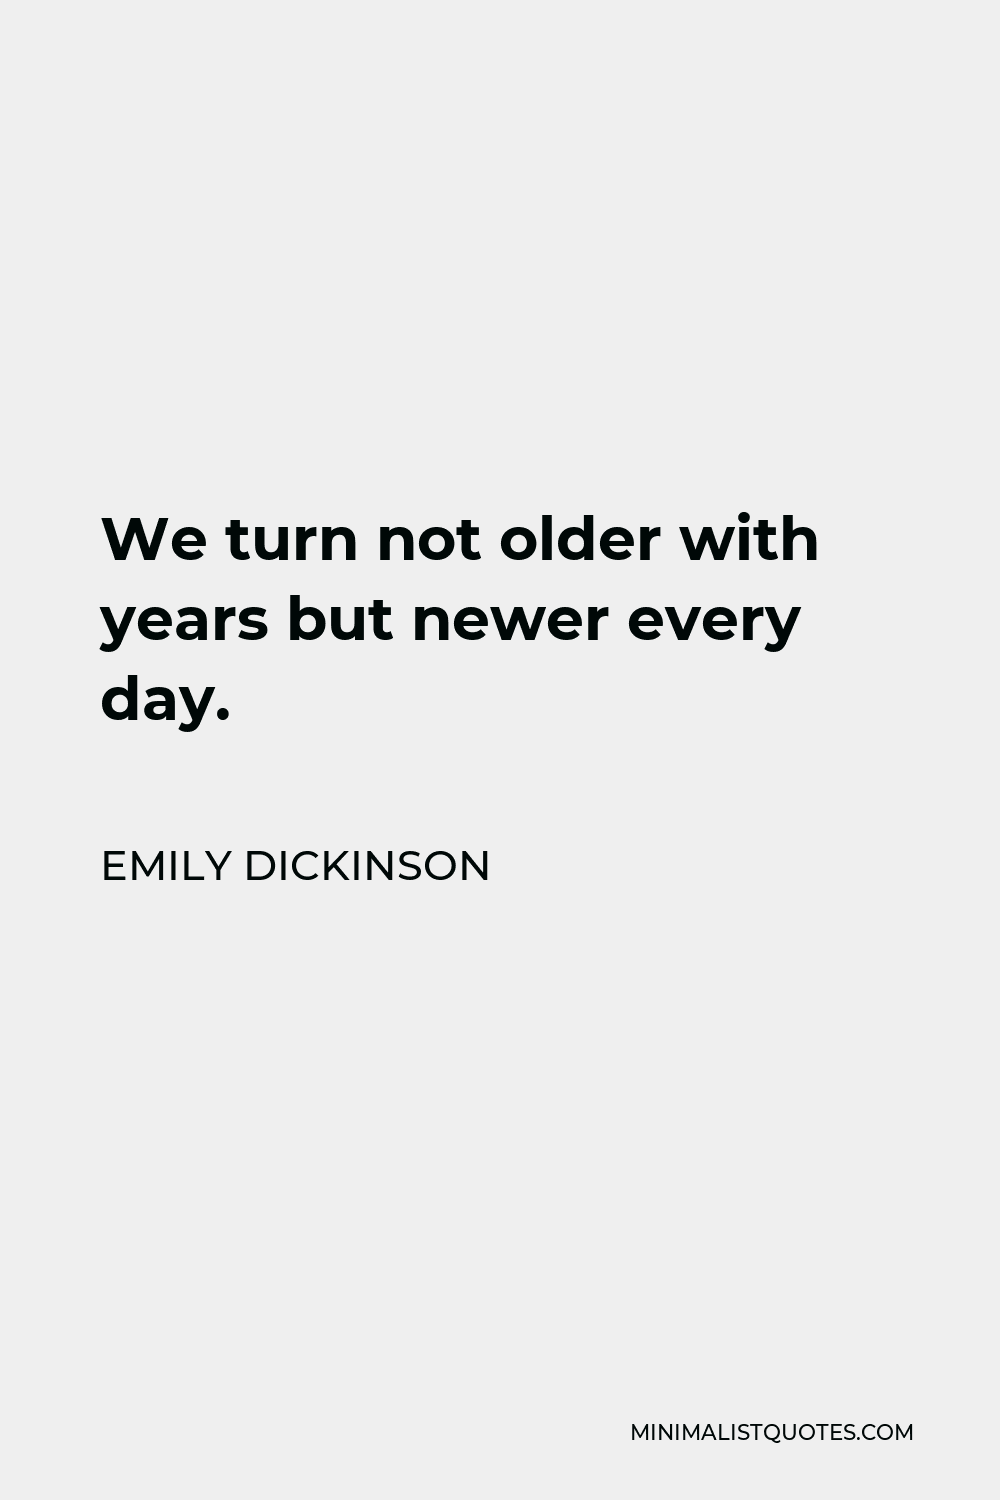 Emily Dickinson Quote - We turn not older with years but newer every day.